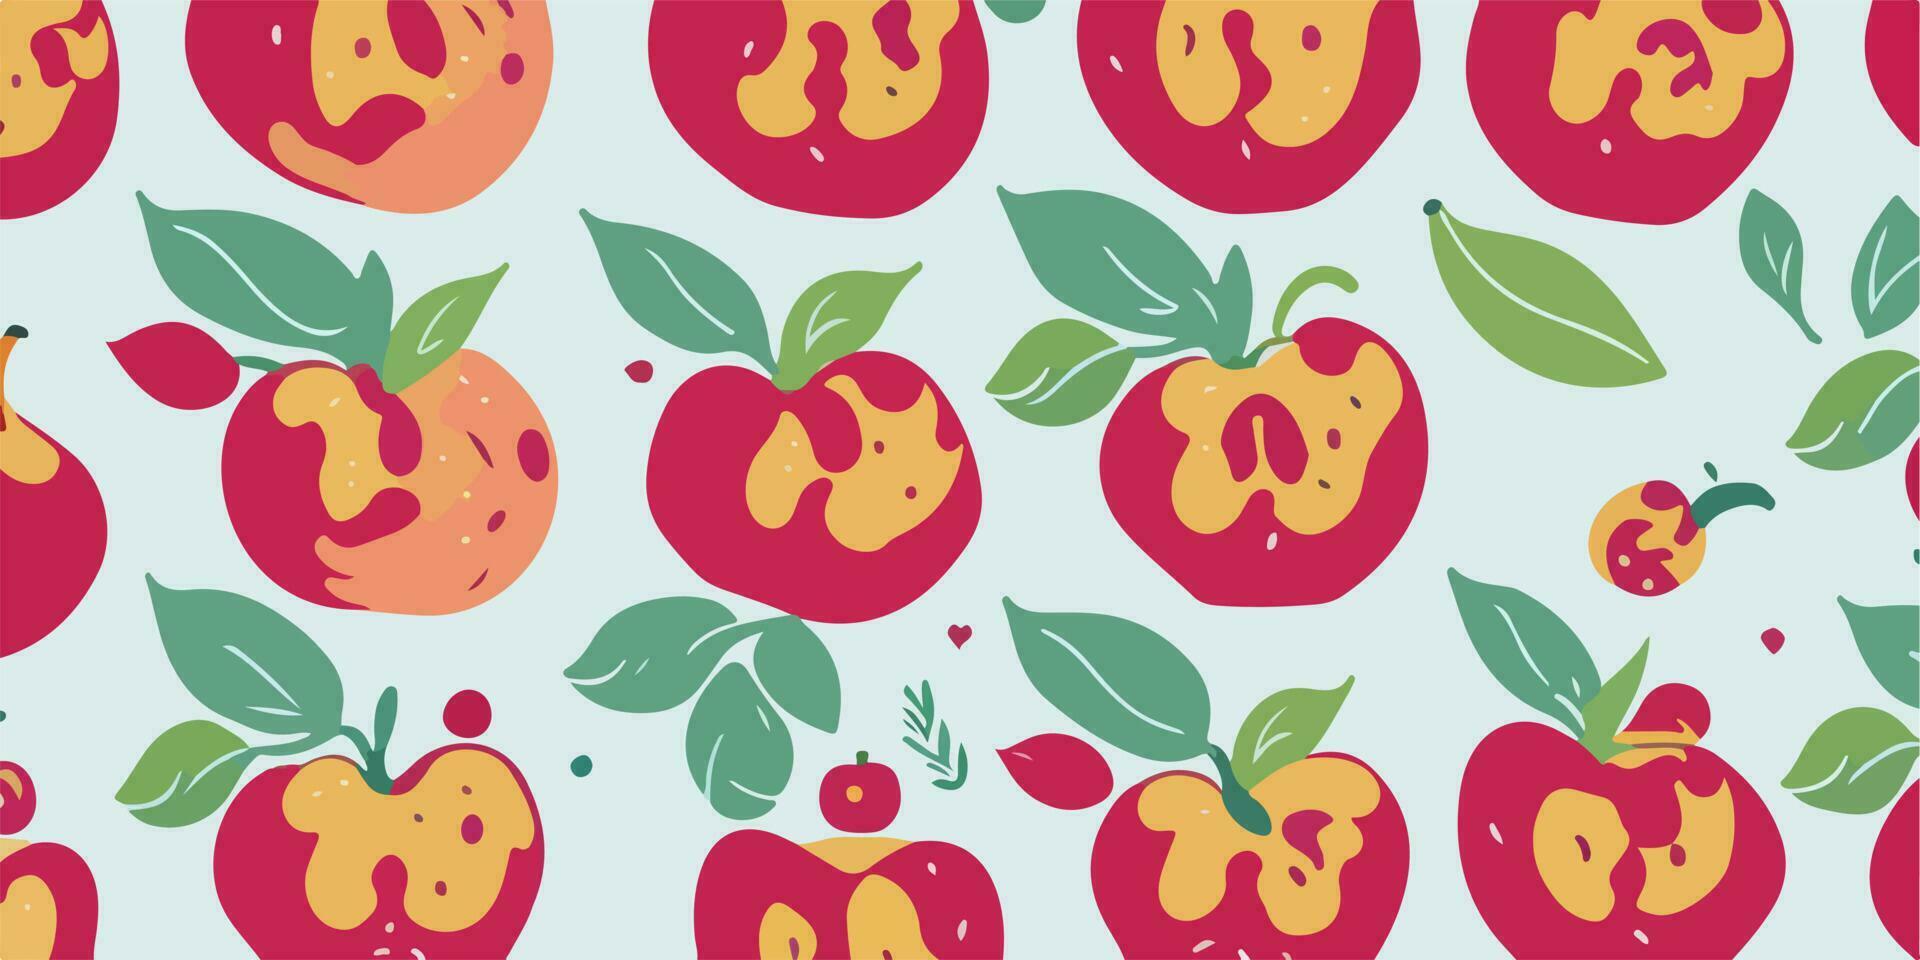 Organic Abstractions, Artistic Apple Patterns in Nature-Inspired Design vector